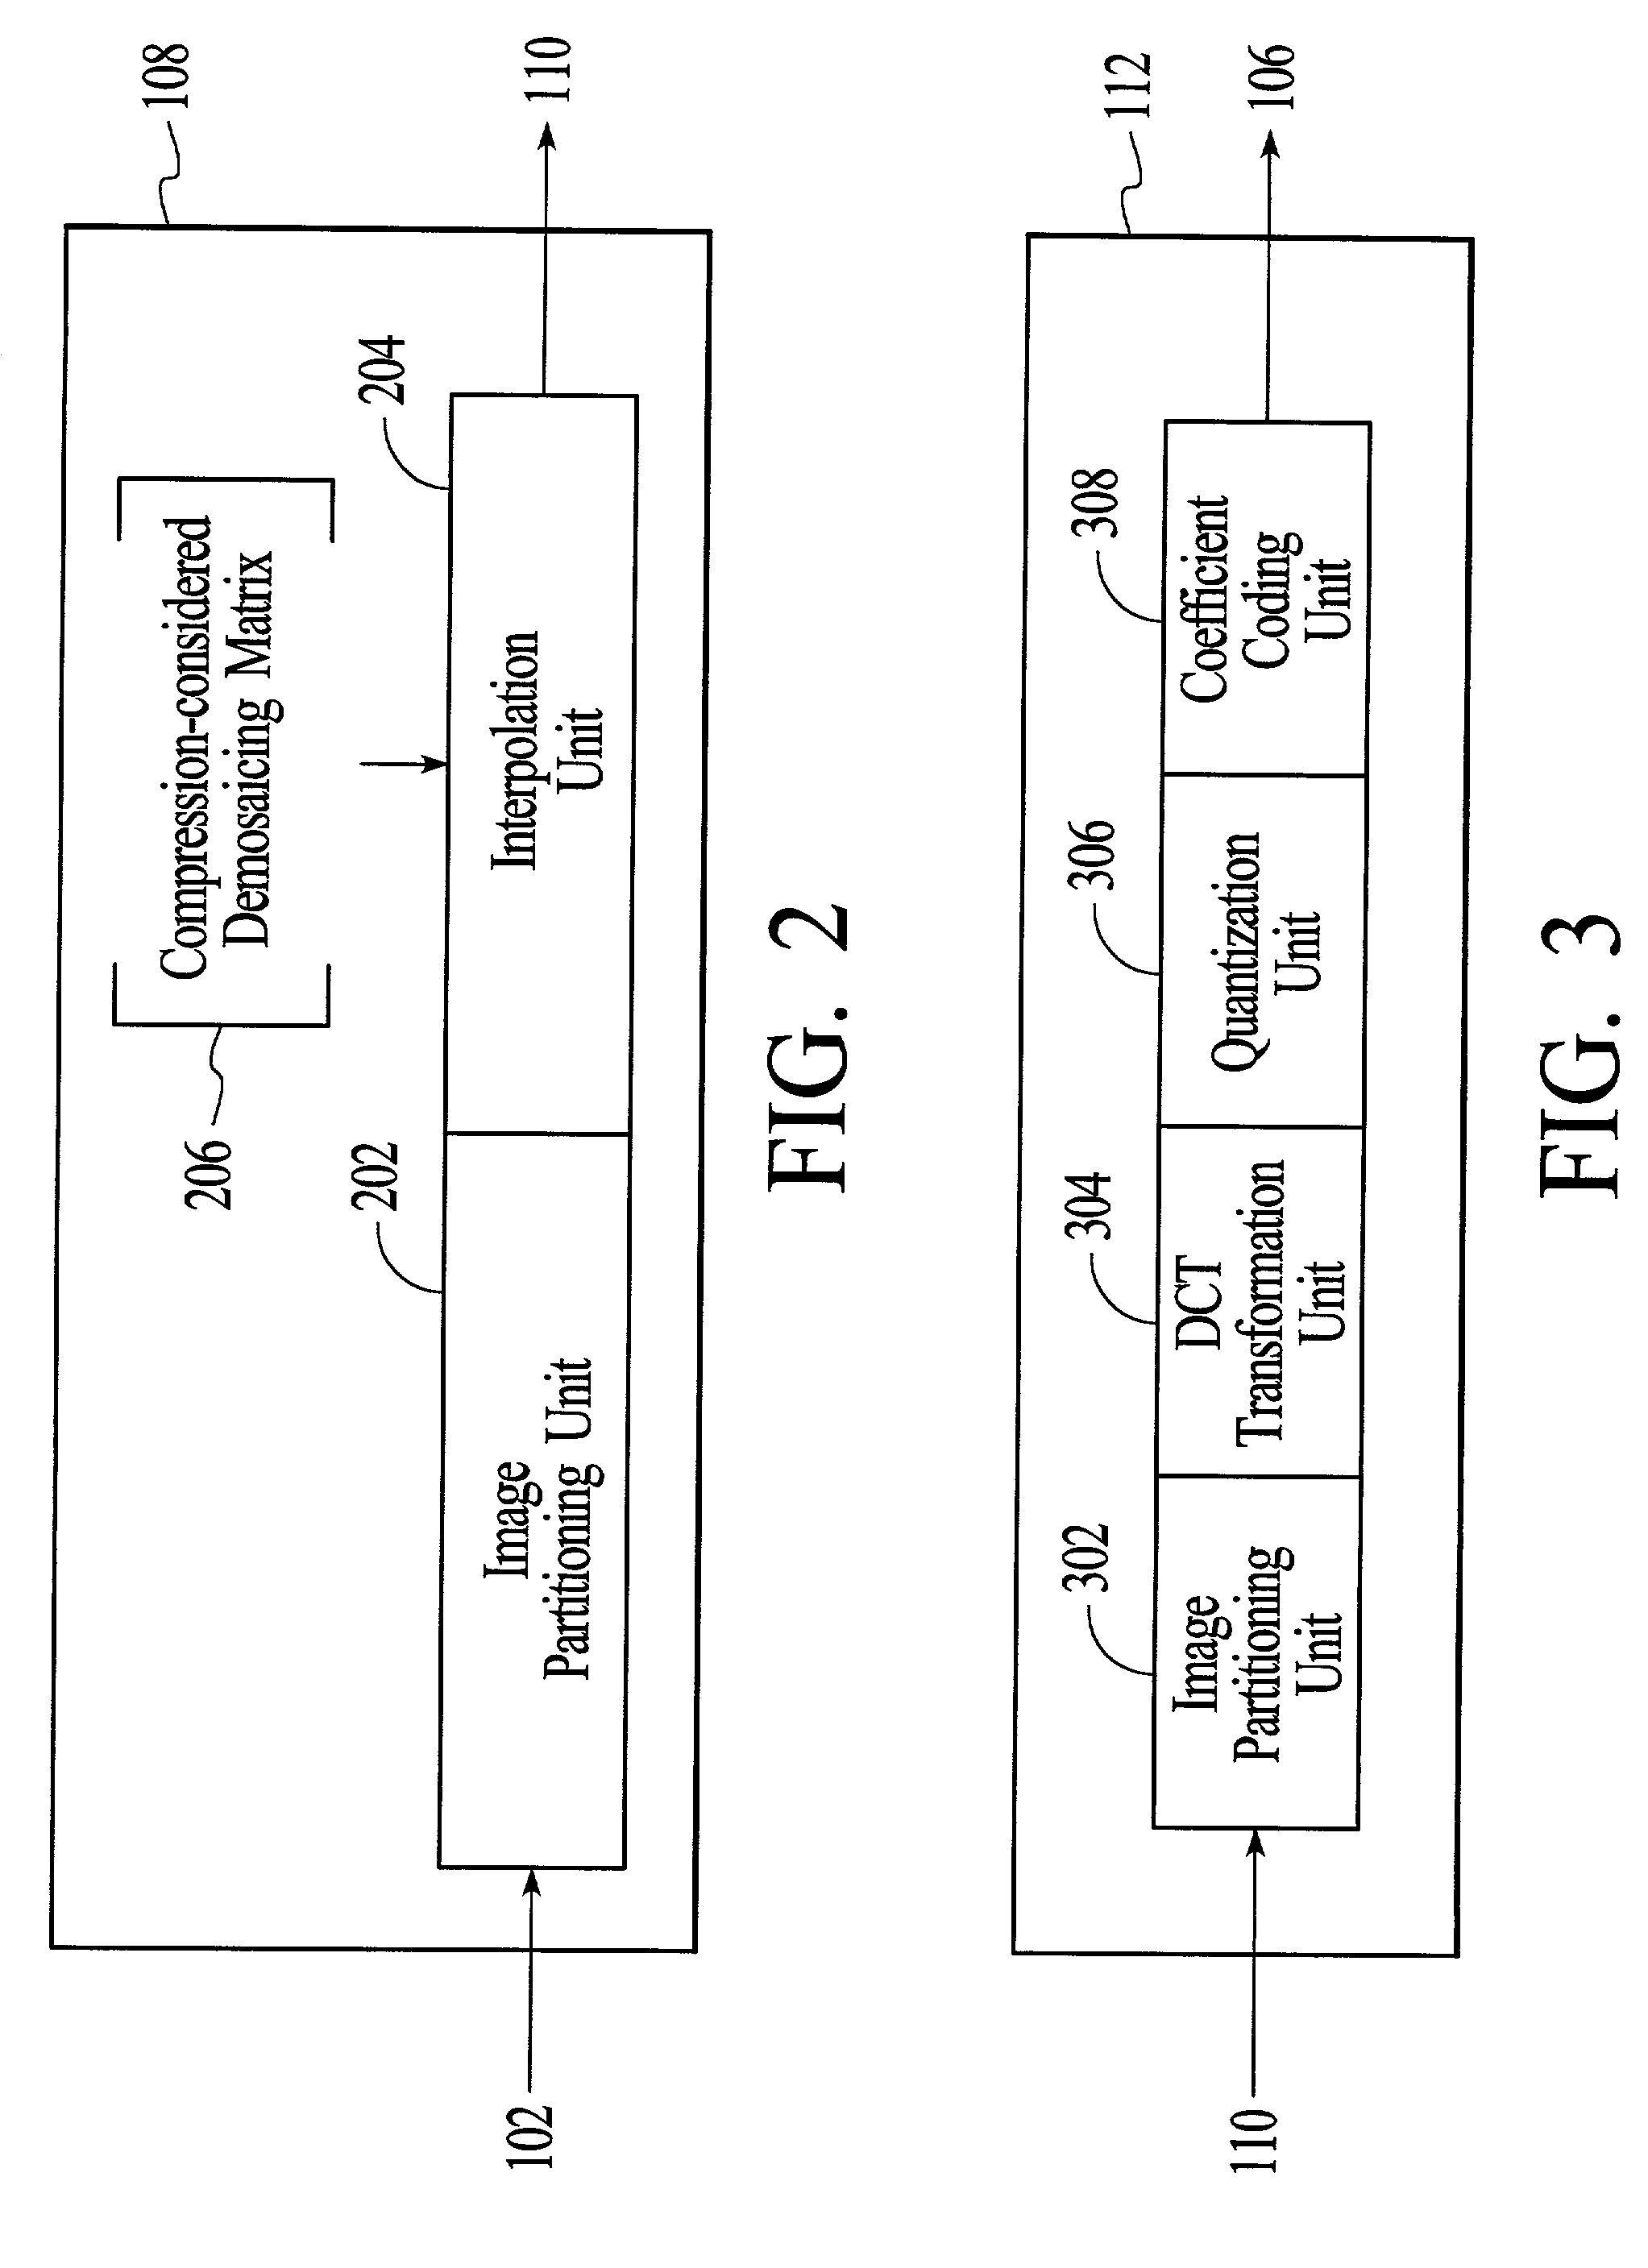 System and method for demosaicing raw data images with compression considerations